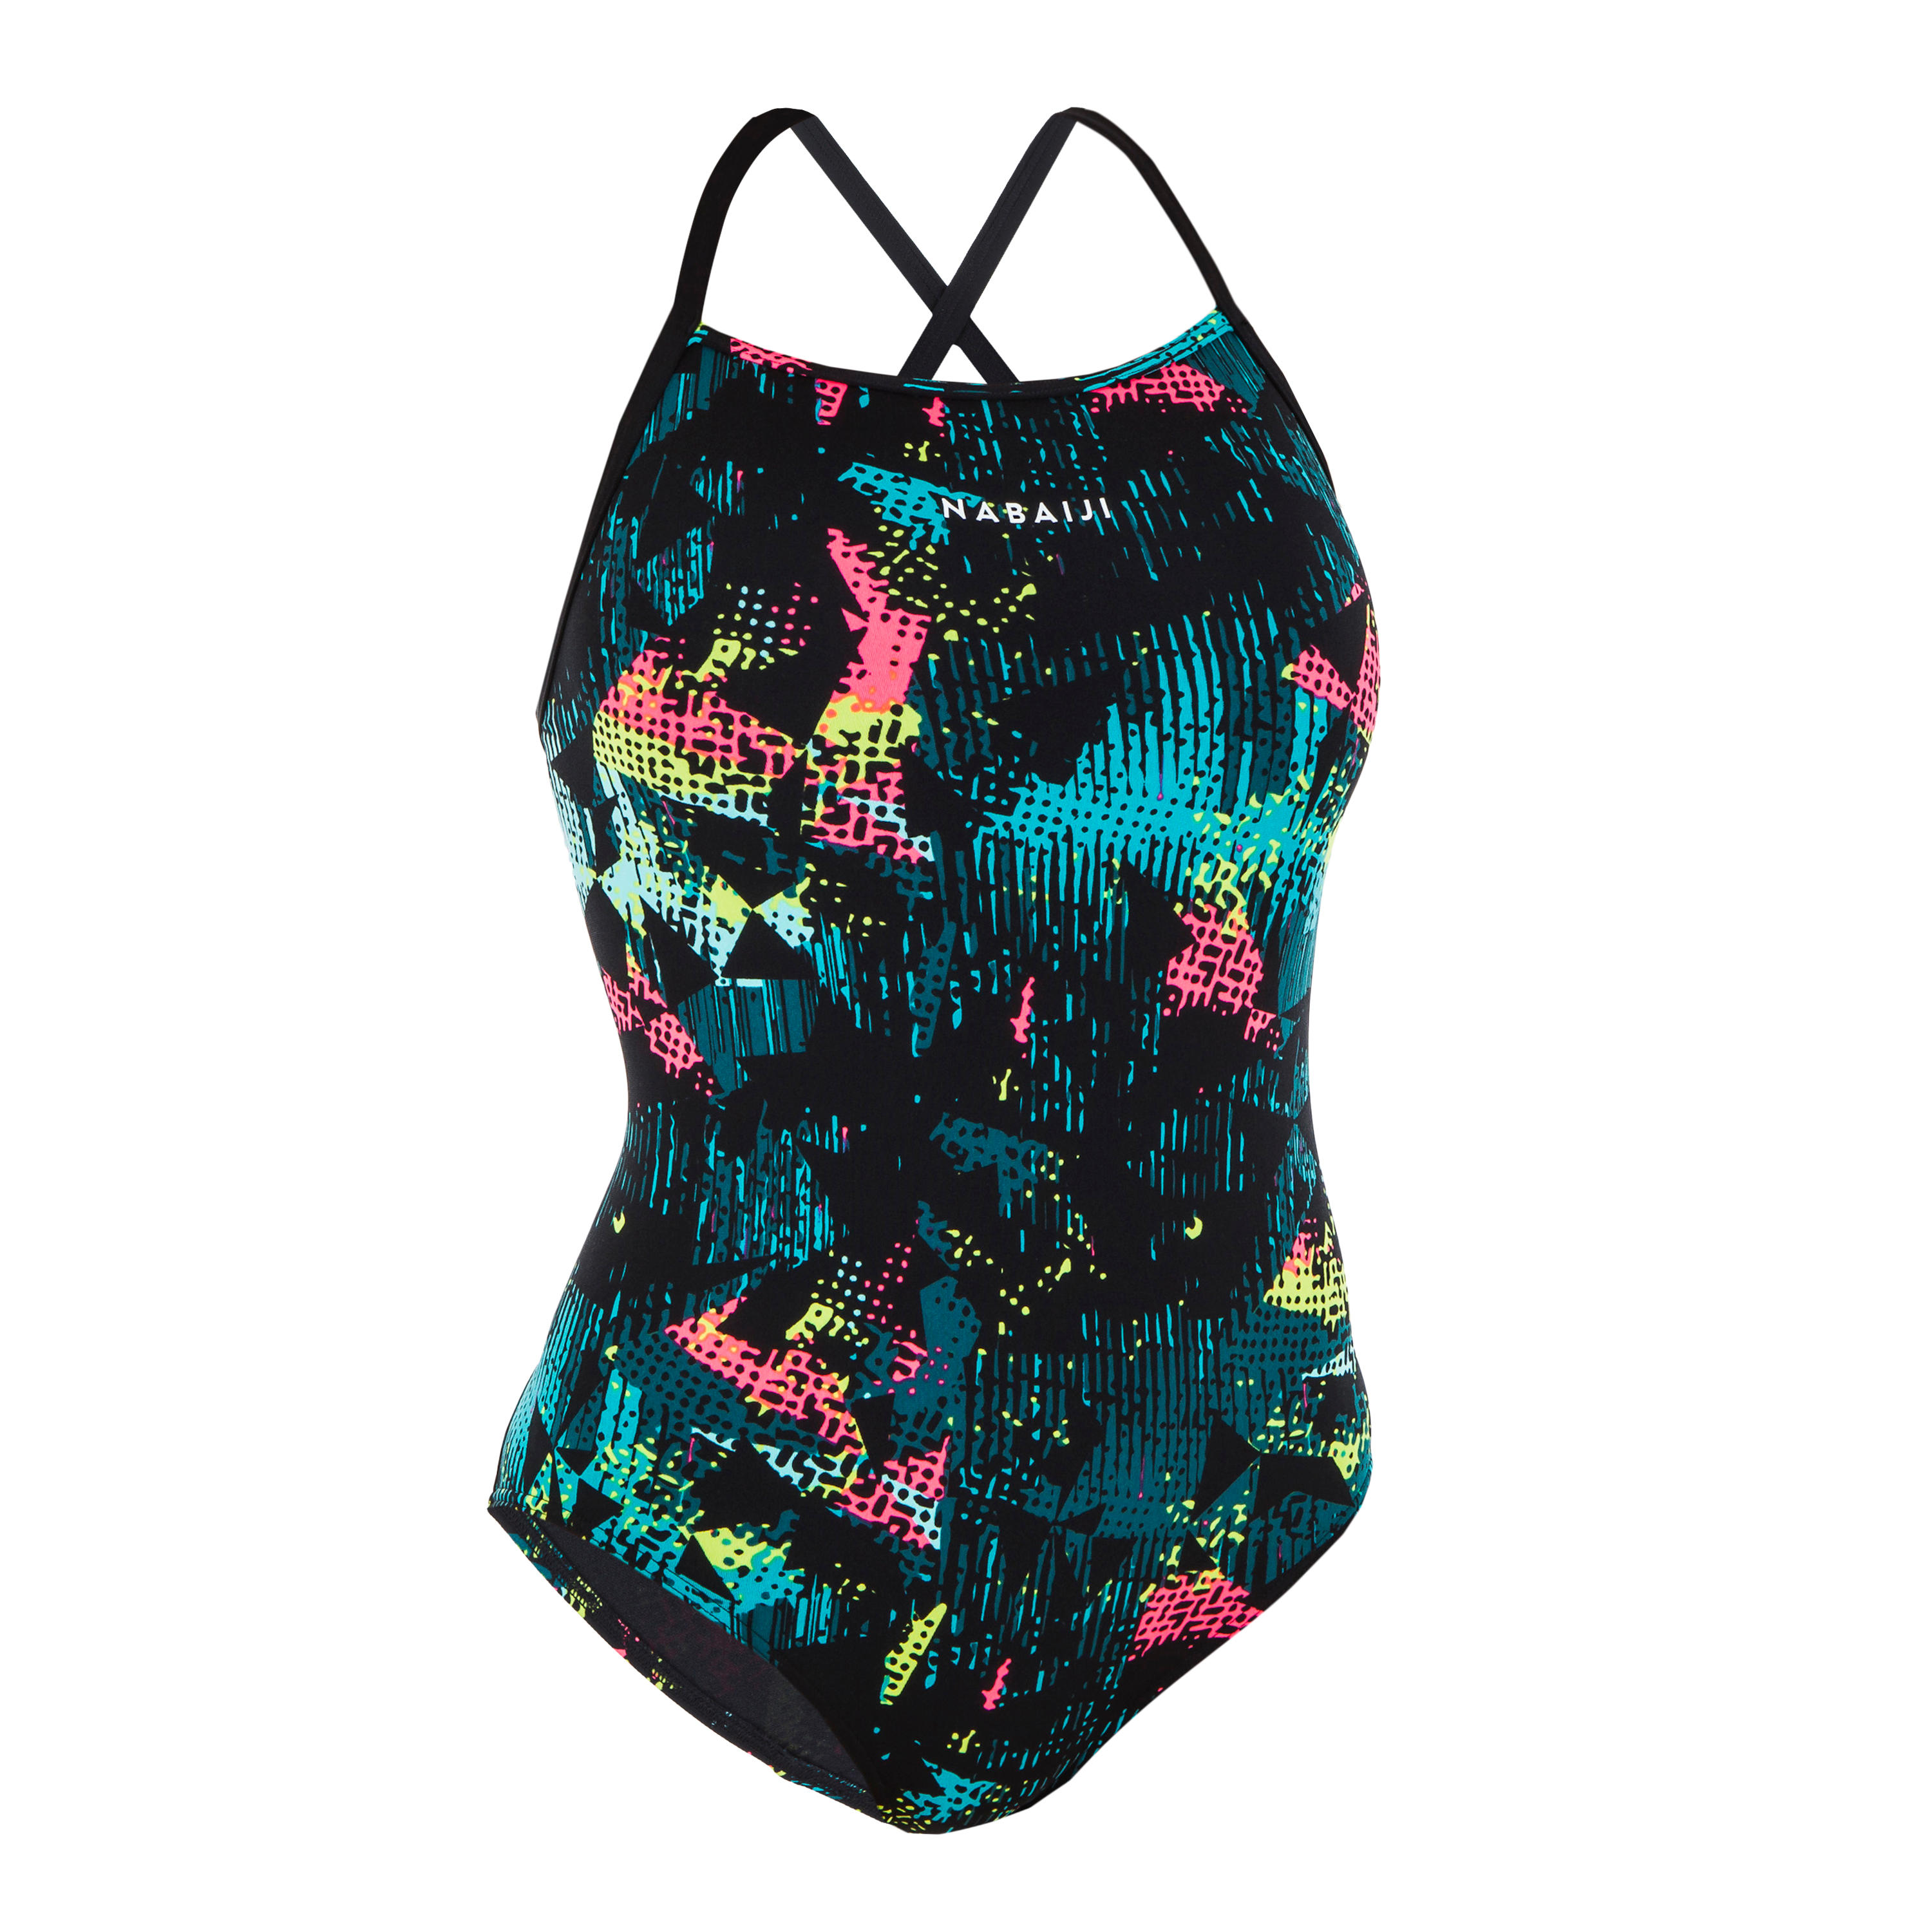 Women's One-Piece Swimsuit All Tra - Black 4/4